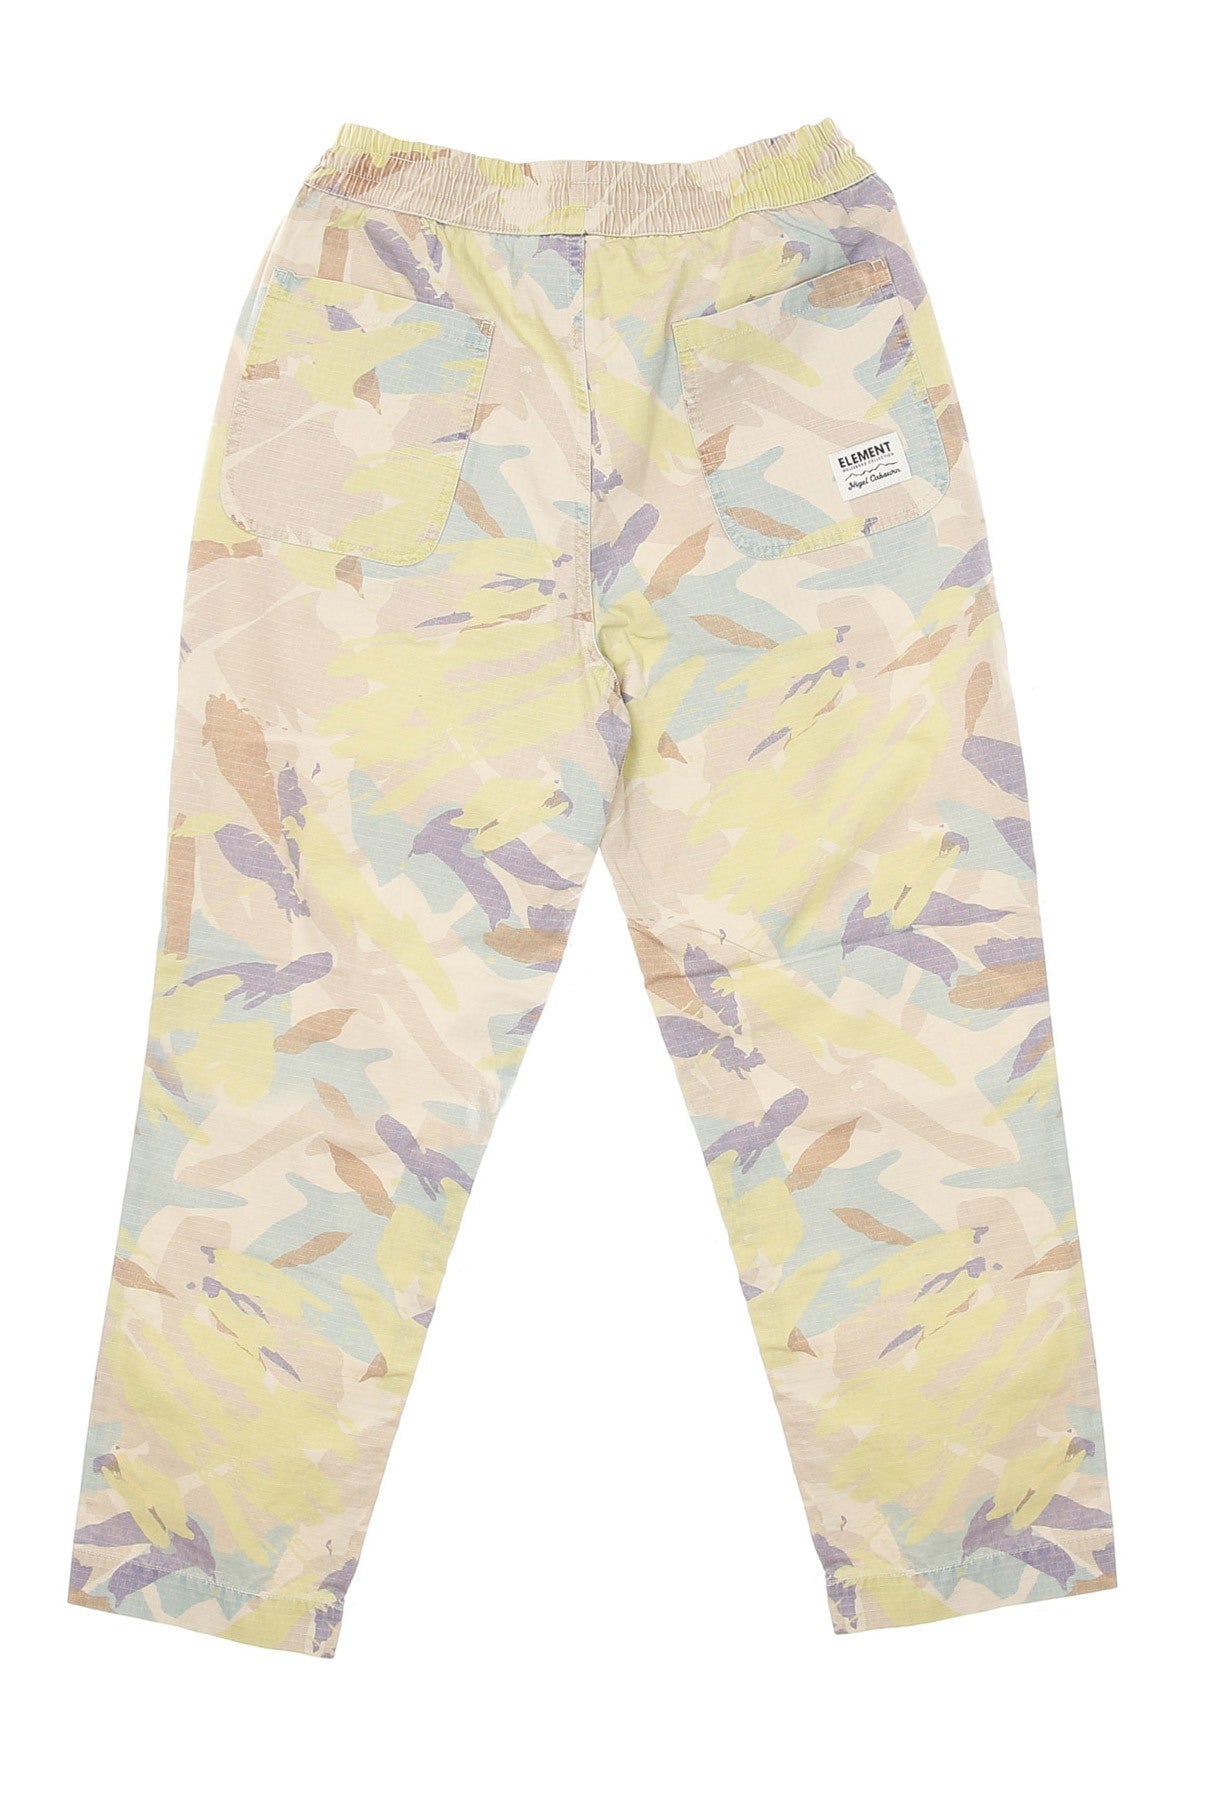 Pantalone Lungo Uomo Cabourn Overall Pants Abstract Camo